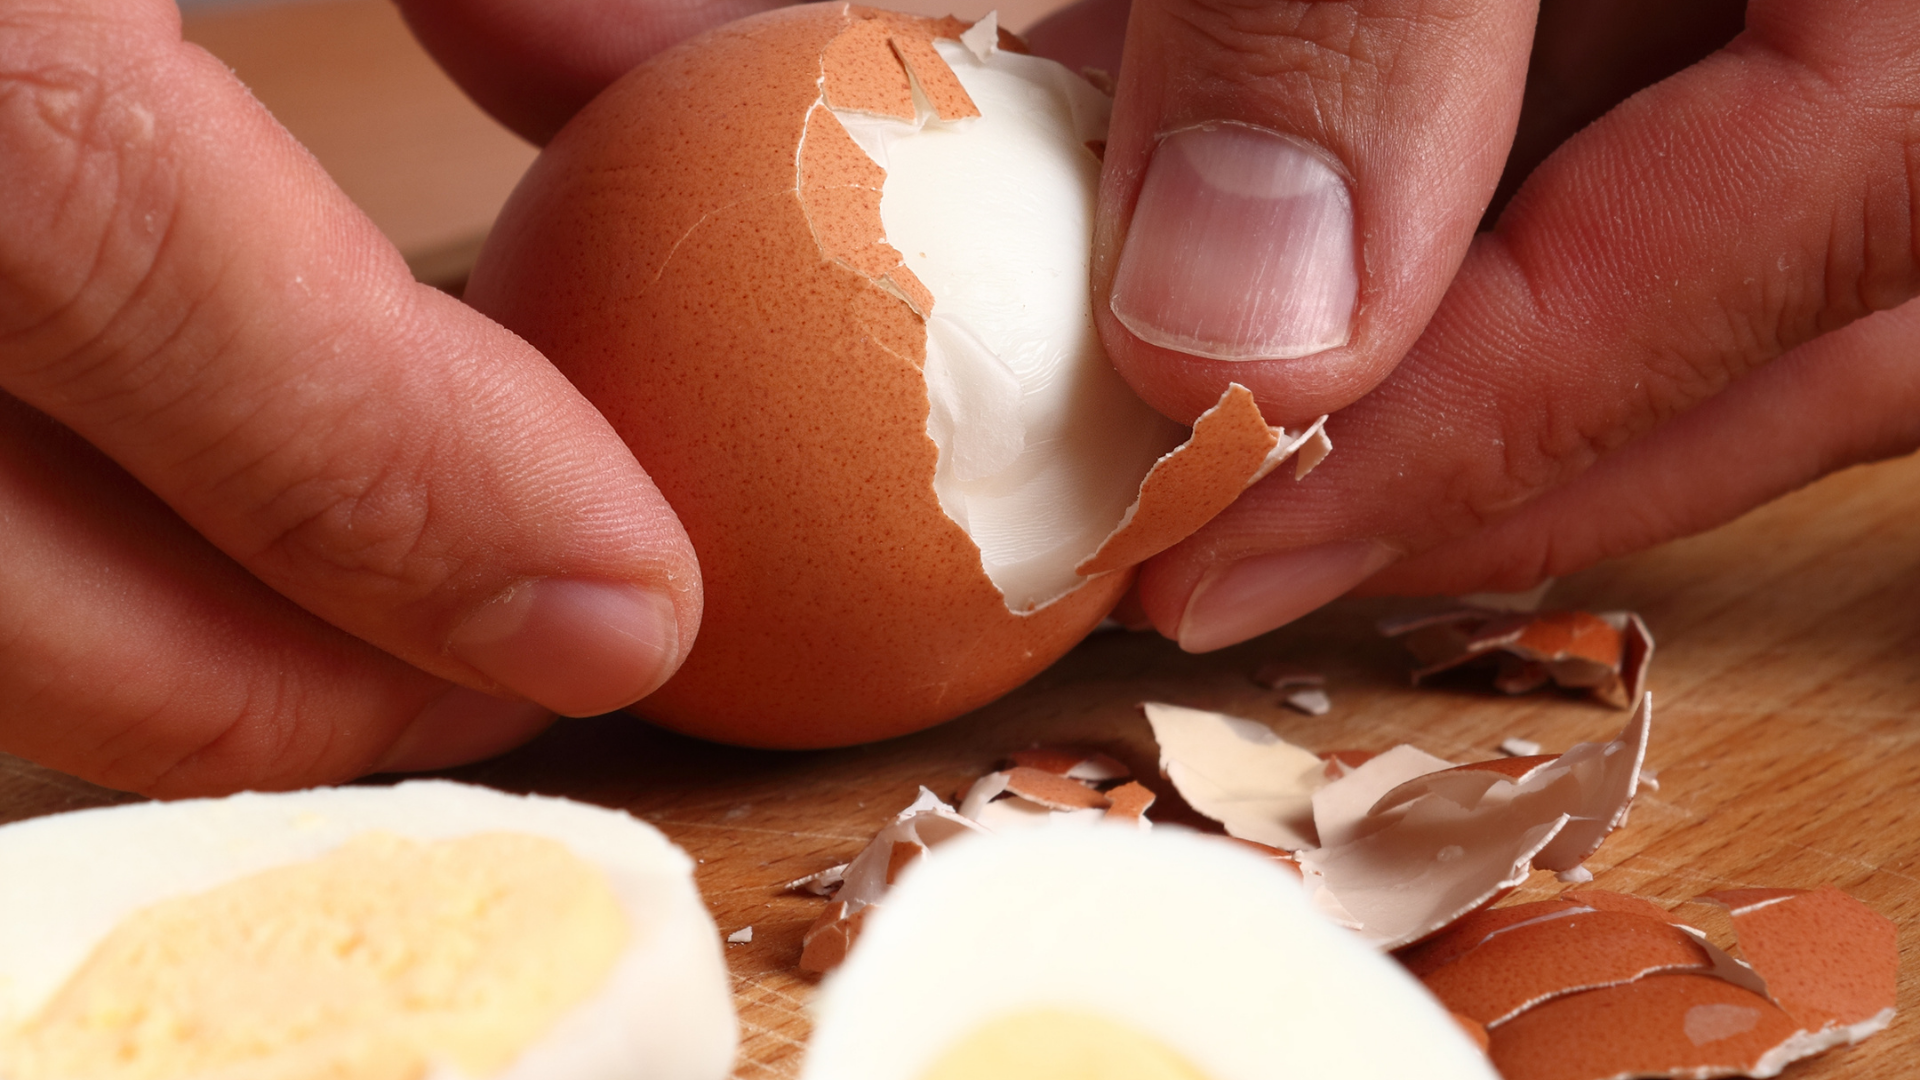 Stock photo of an egg being peeled.  Photo credit: Canva...